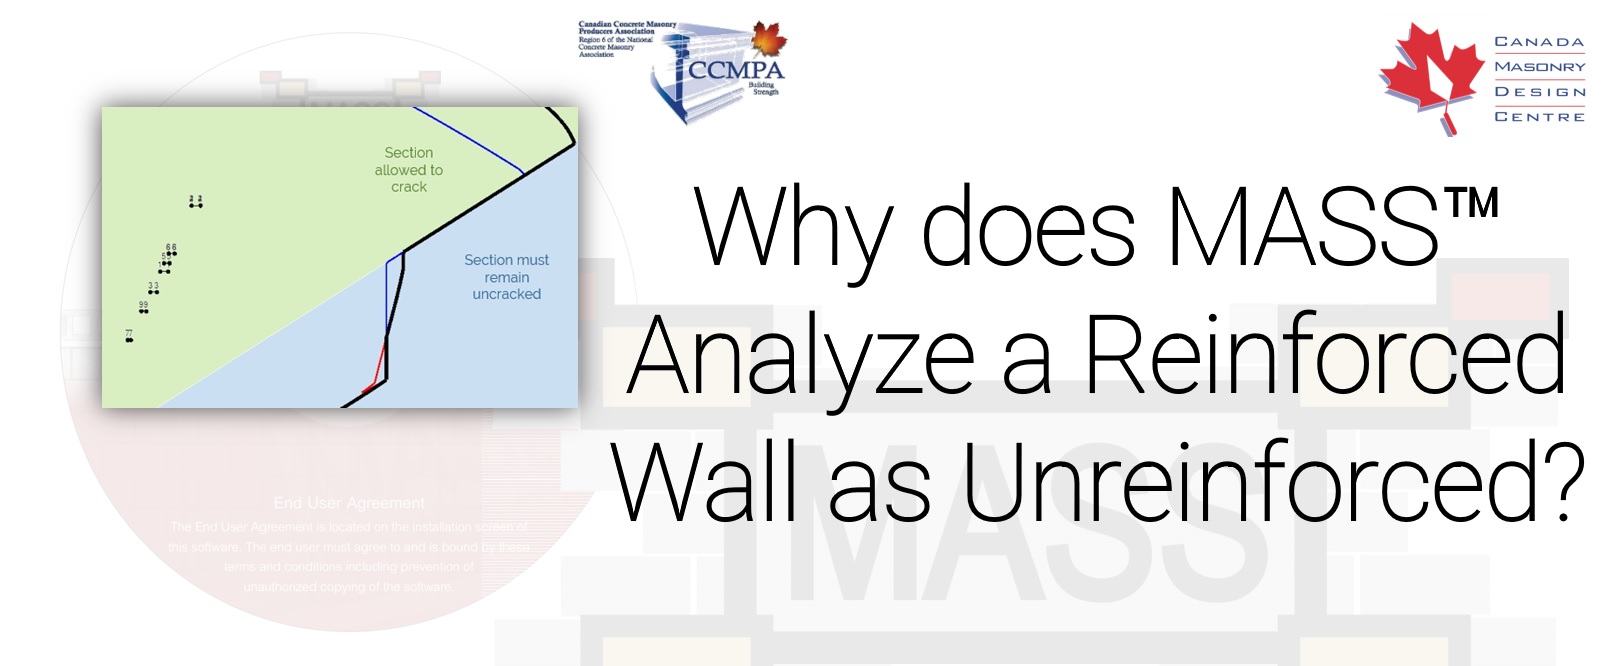 Why does MASS use unreinforced analysis for a design with reinforcement?